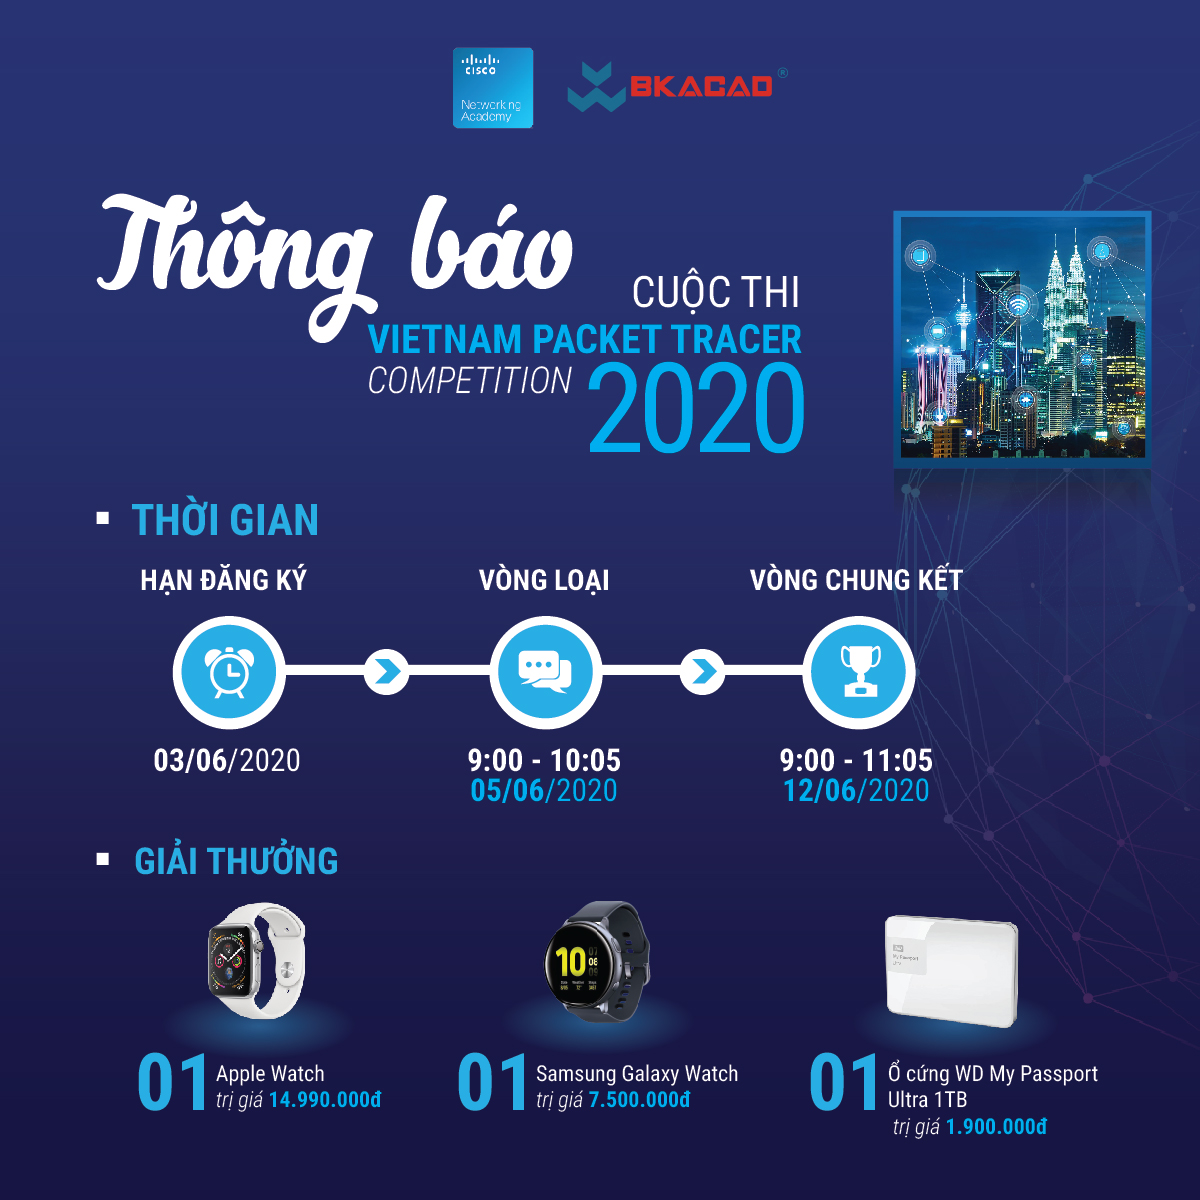 THÔNG BÁO CUỘC THI VIETNAM PACKET TRACER PACKET COMPETITION 2020